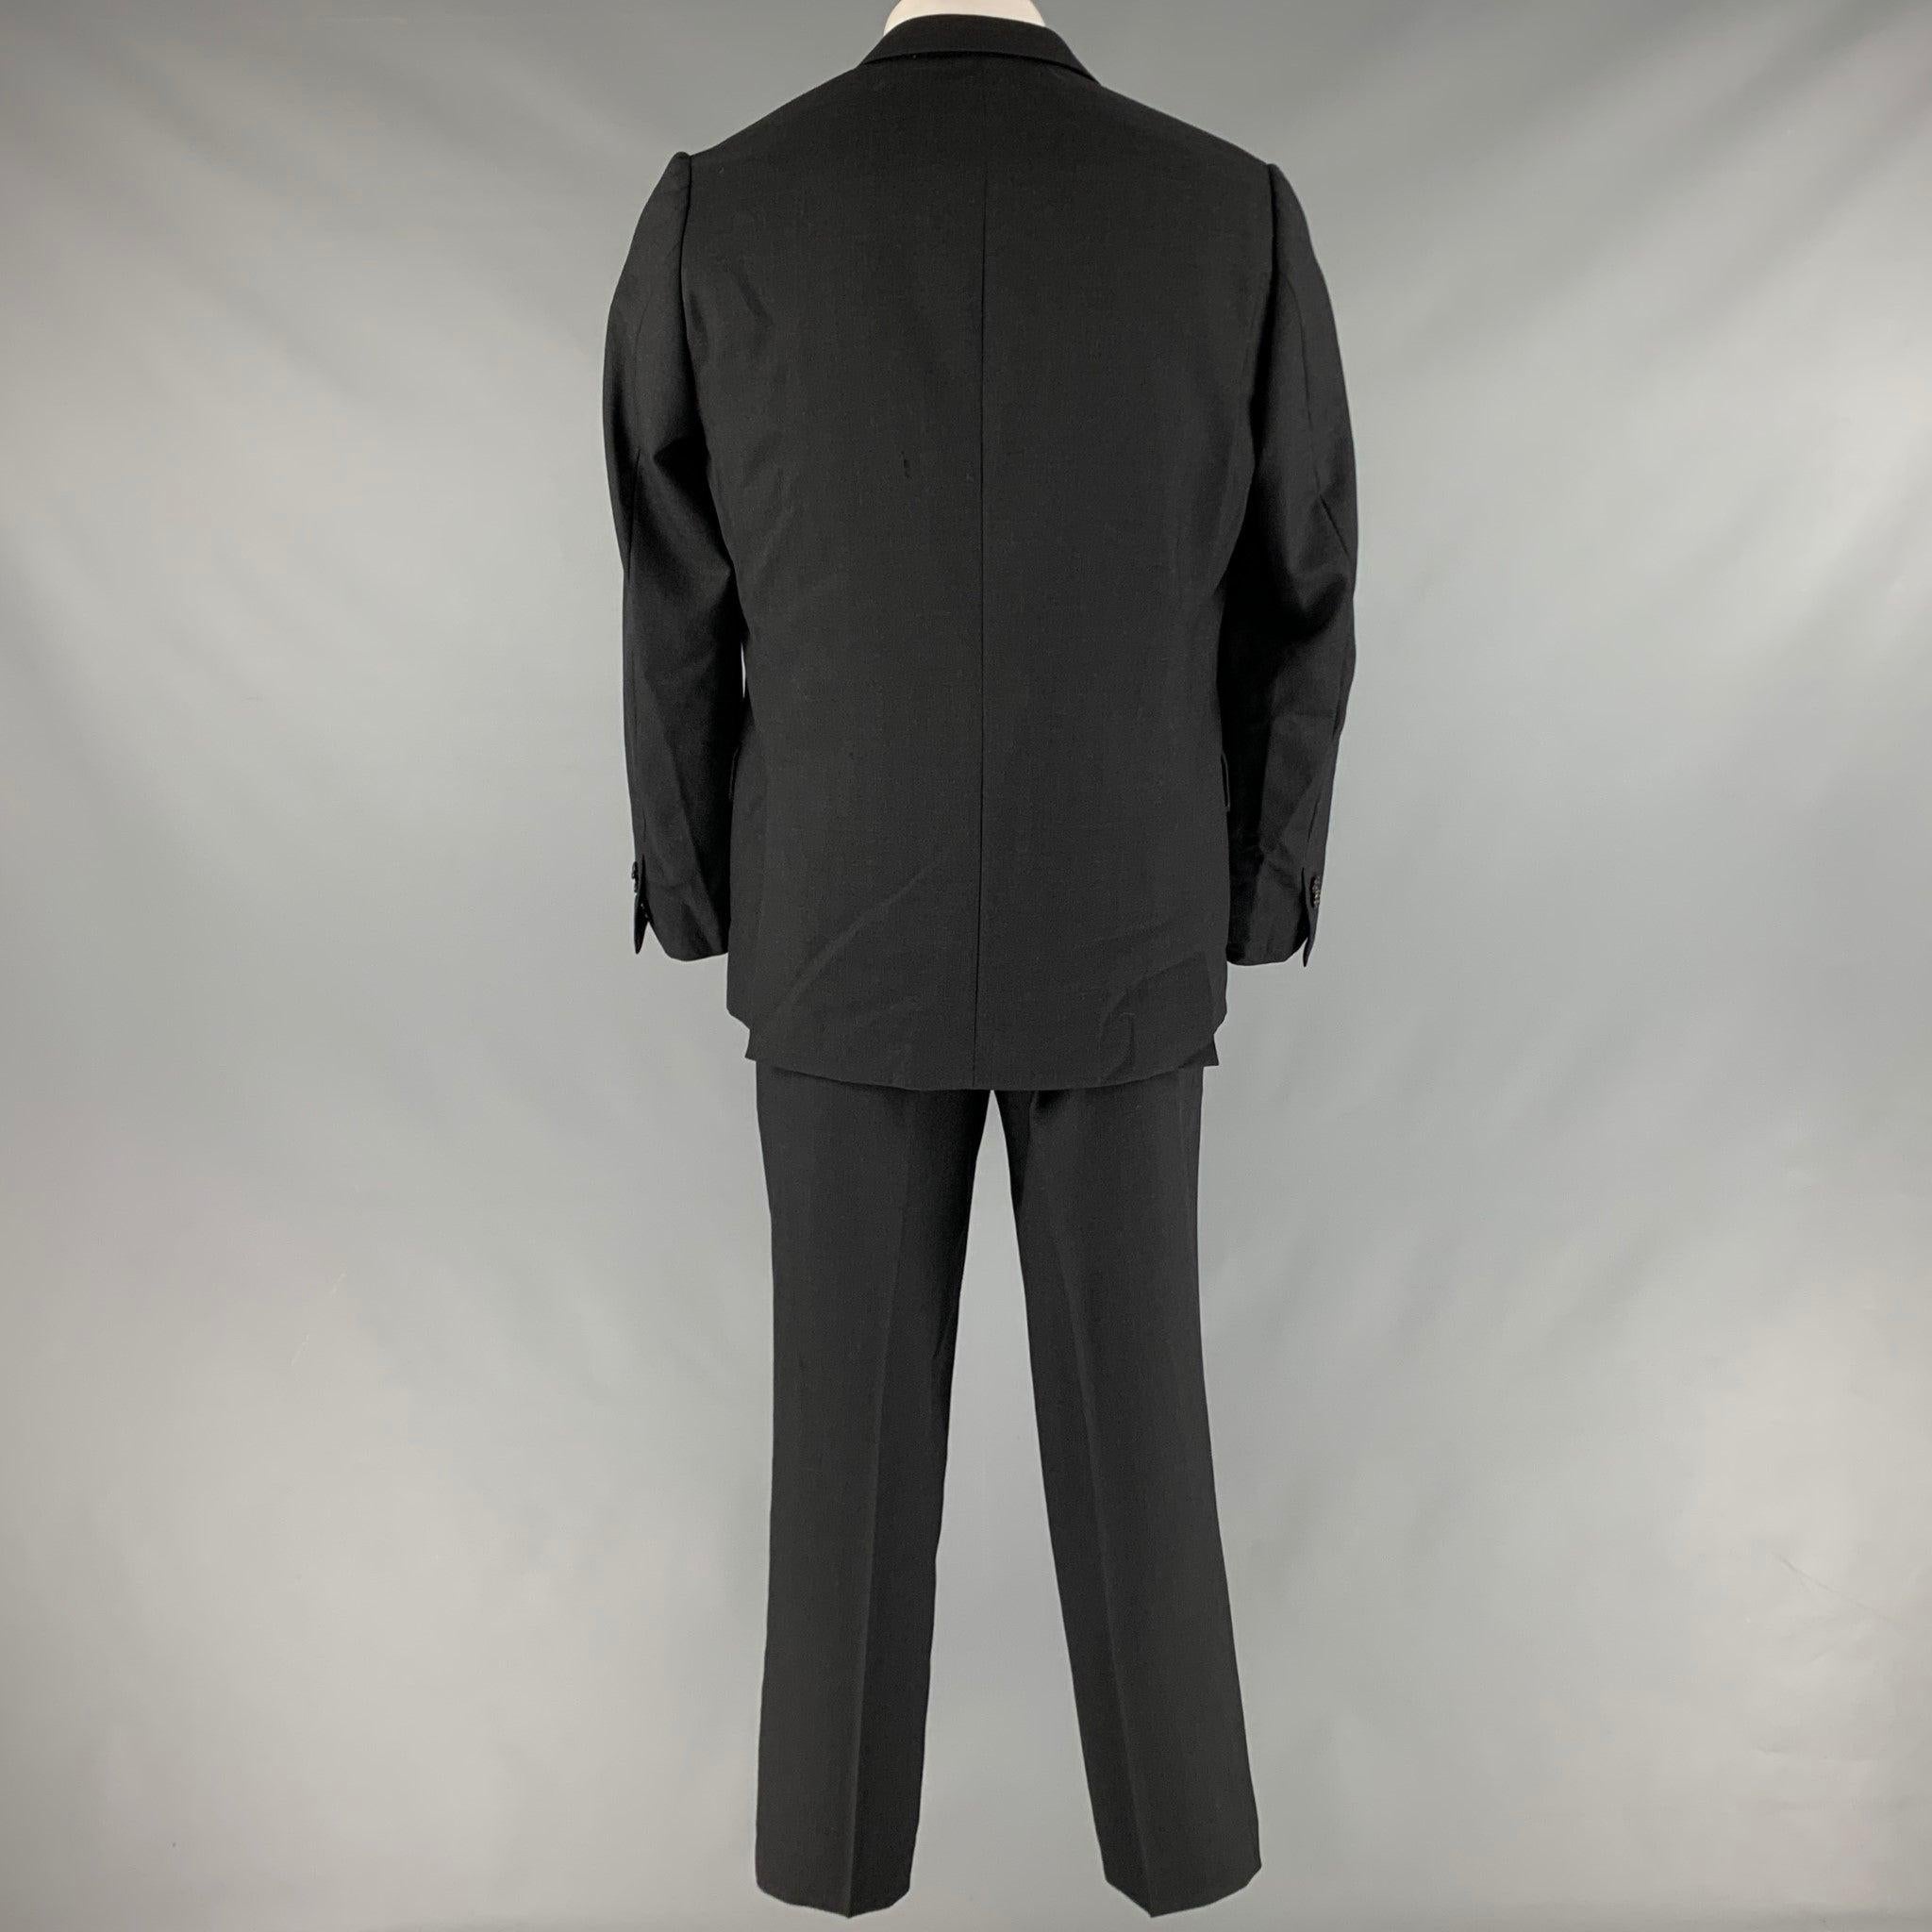 PAUL SMITH Size 42 Black Wool Notch Lapel Suit In Good Condition For Sale In San Francisco, CA